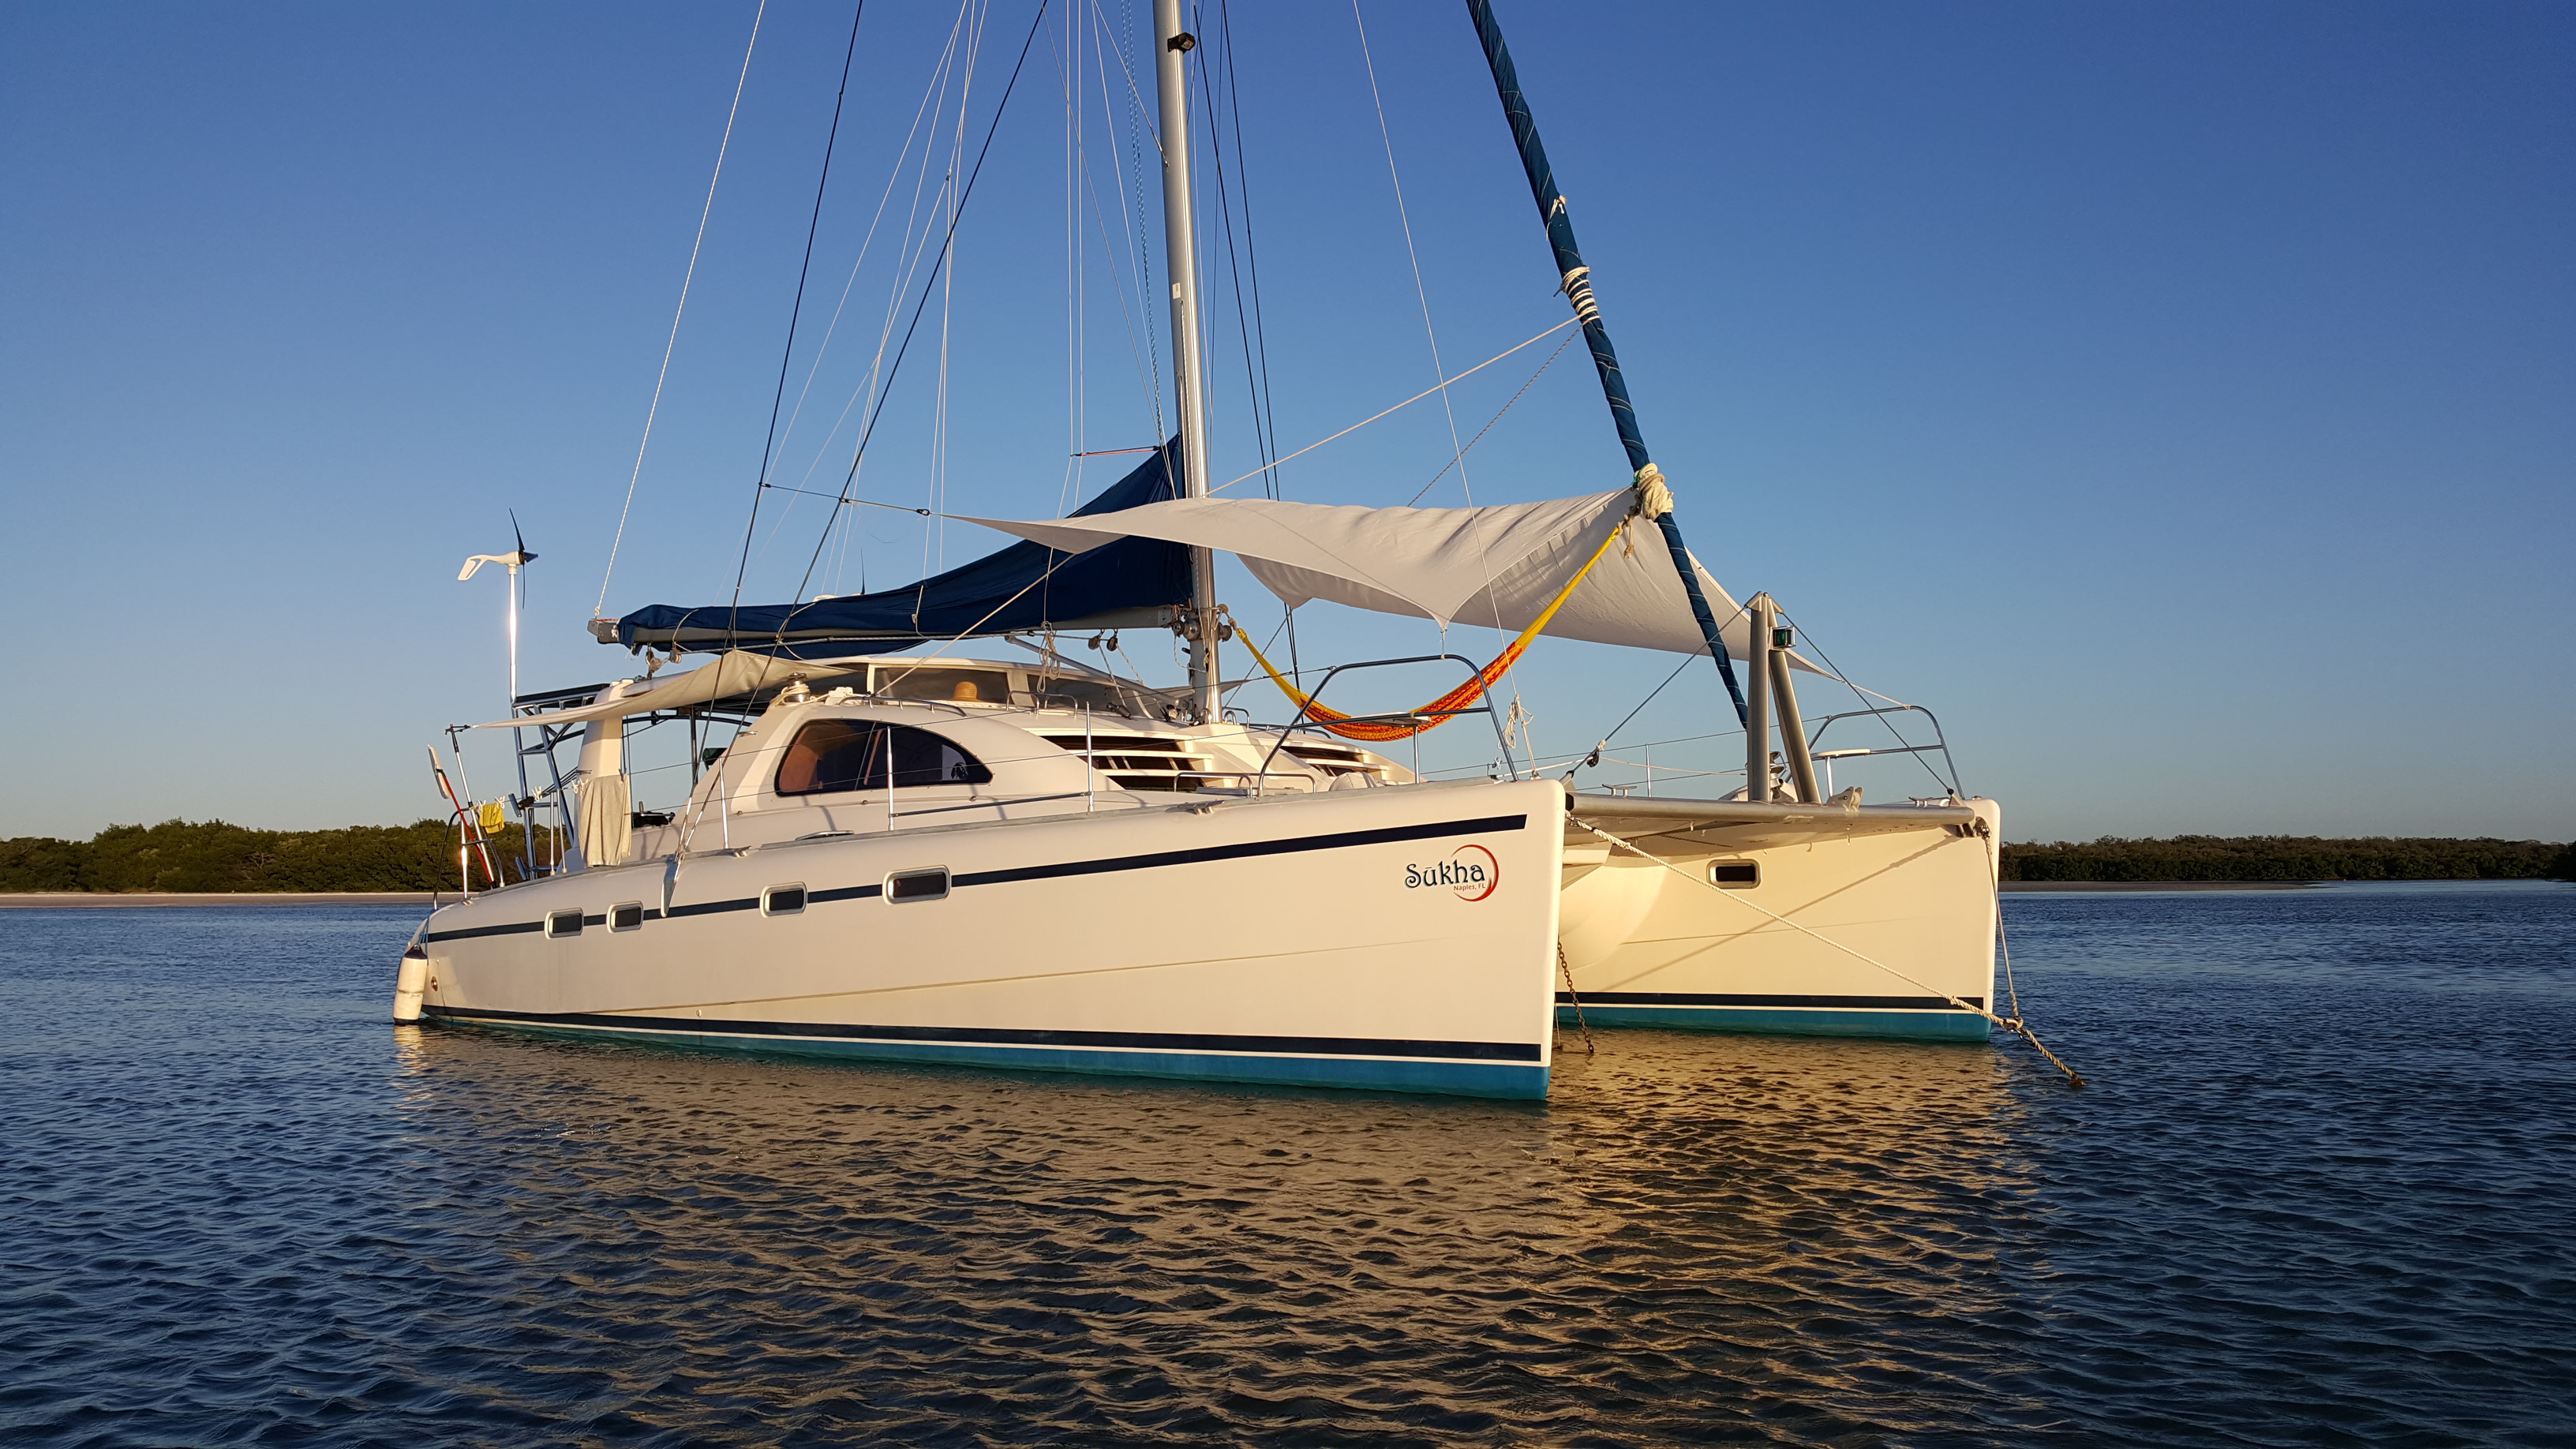 34 ft sailboats for sale